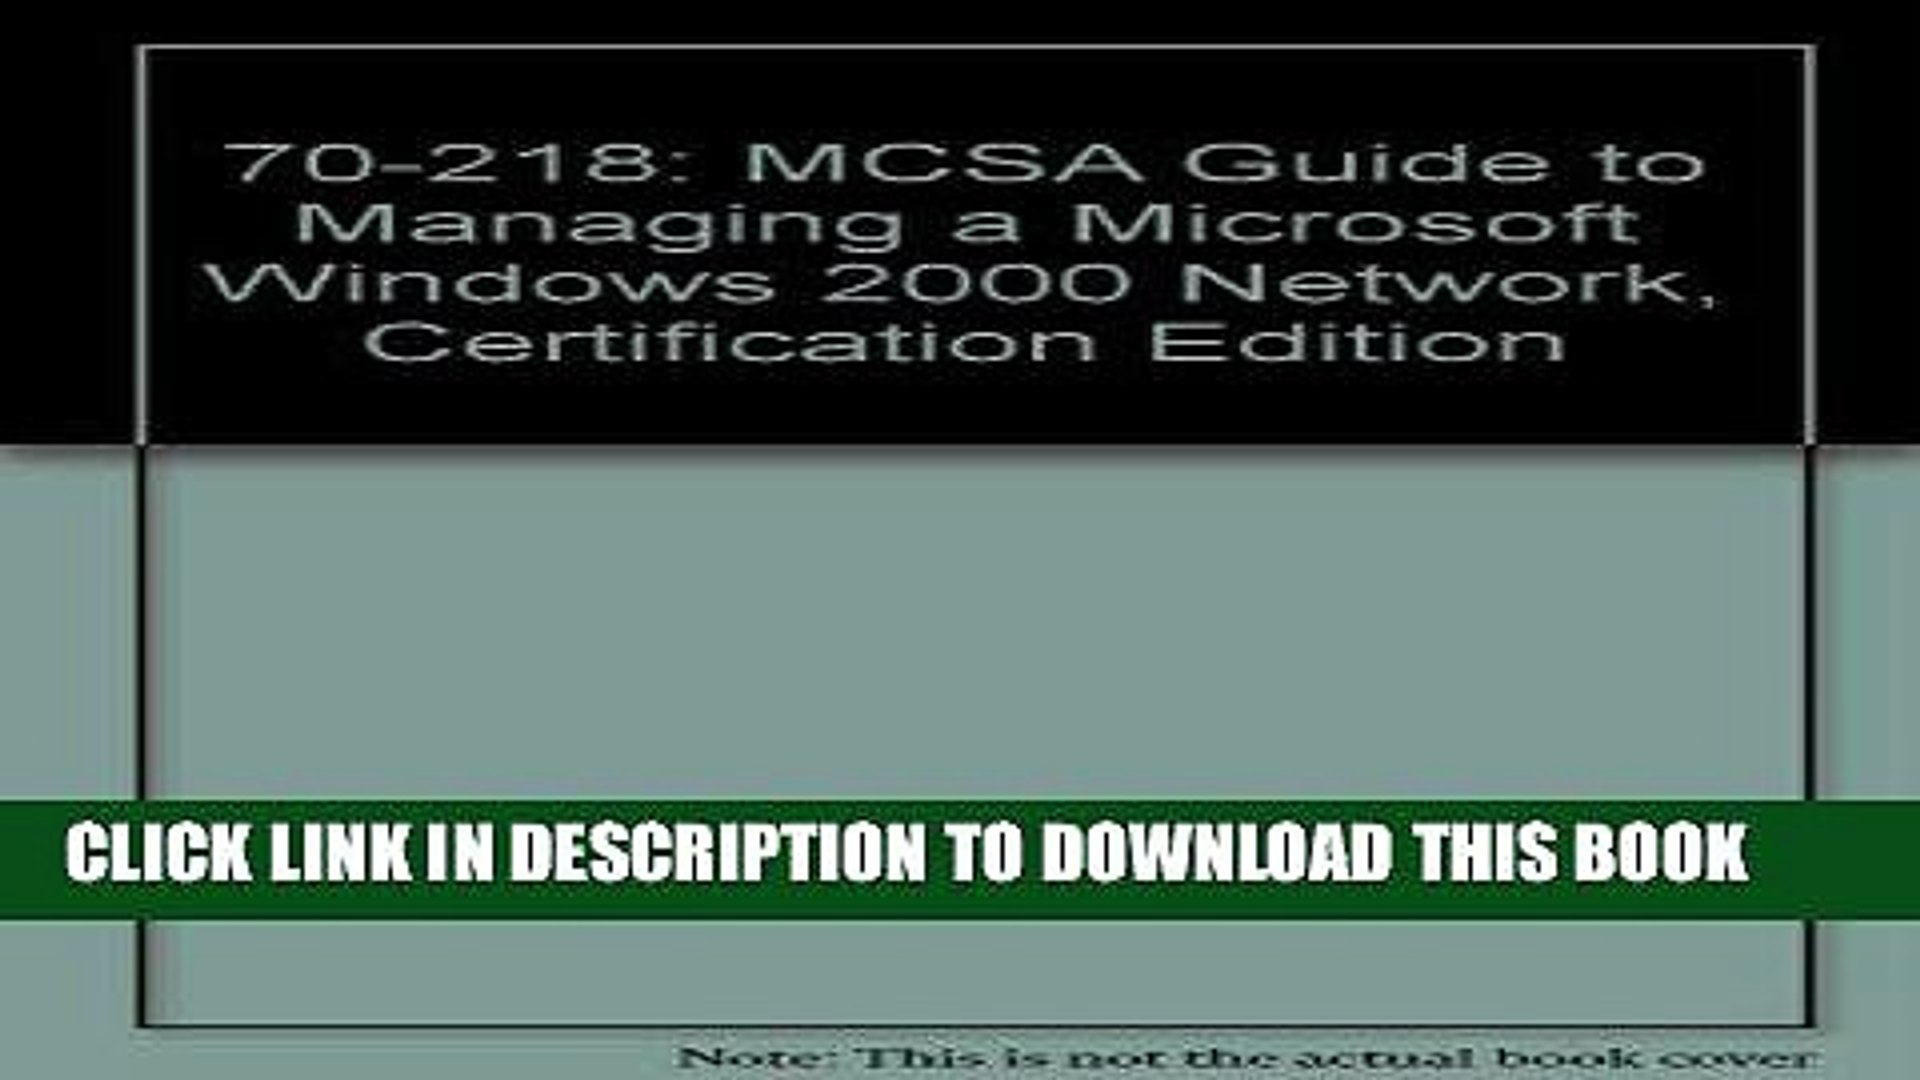 Books Mcsa Guide To Managing Windows 2000 Network - 